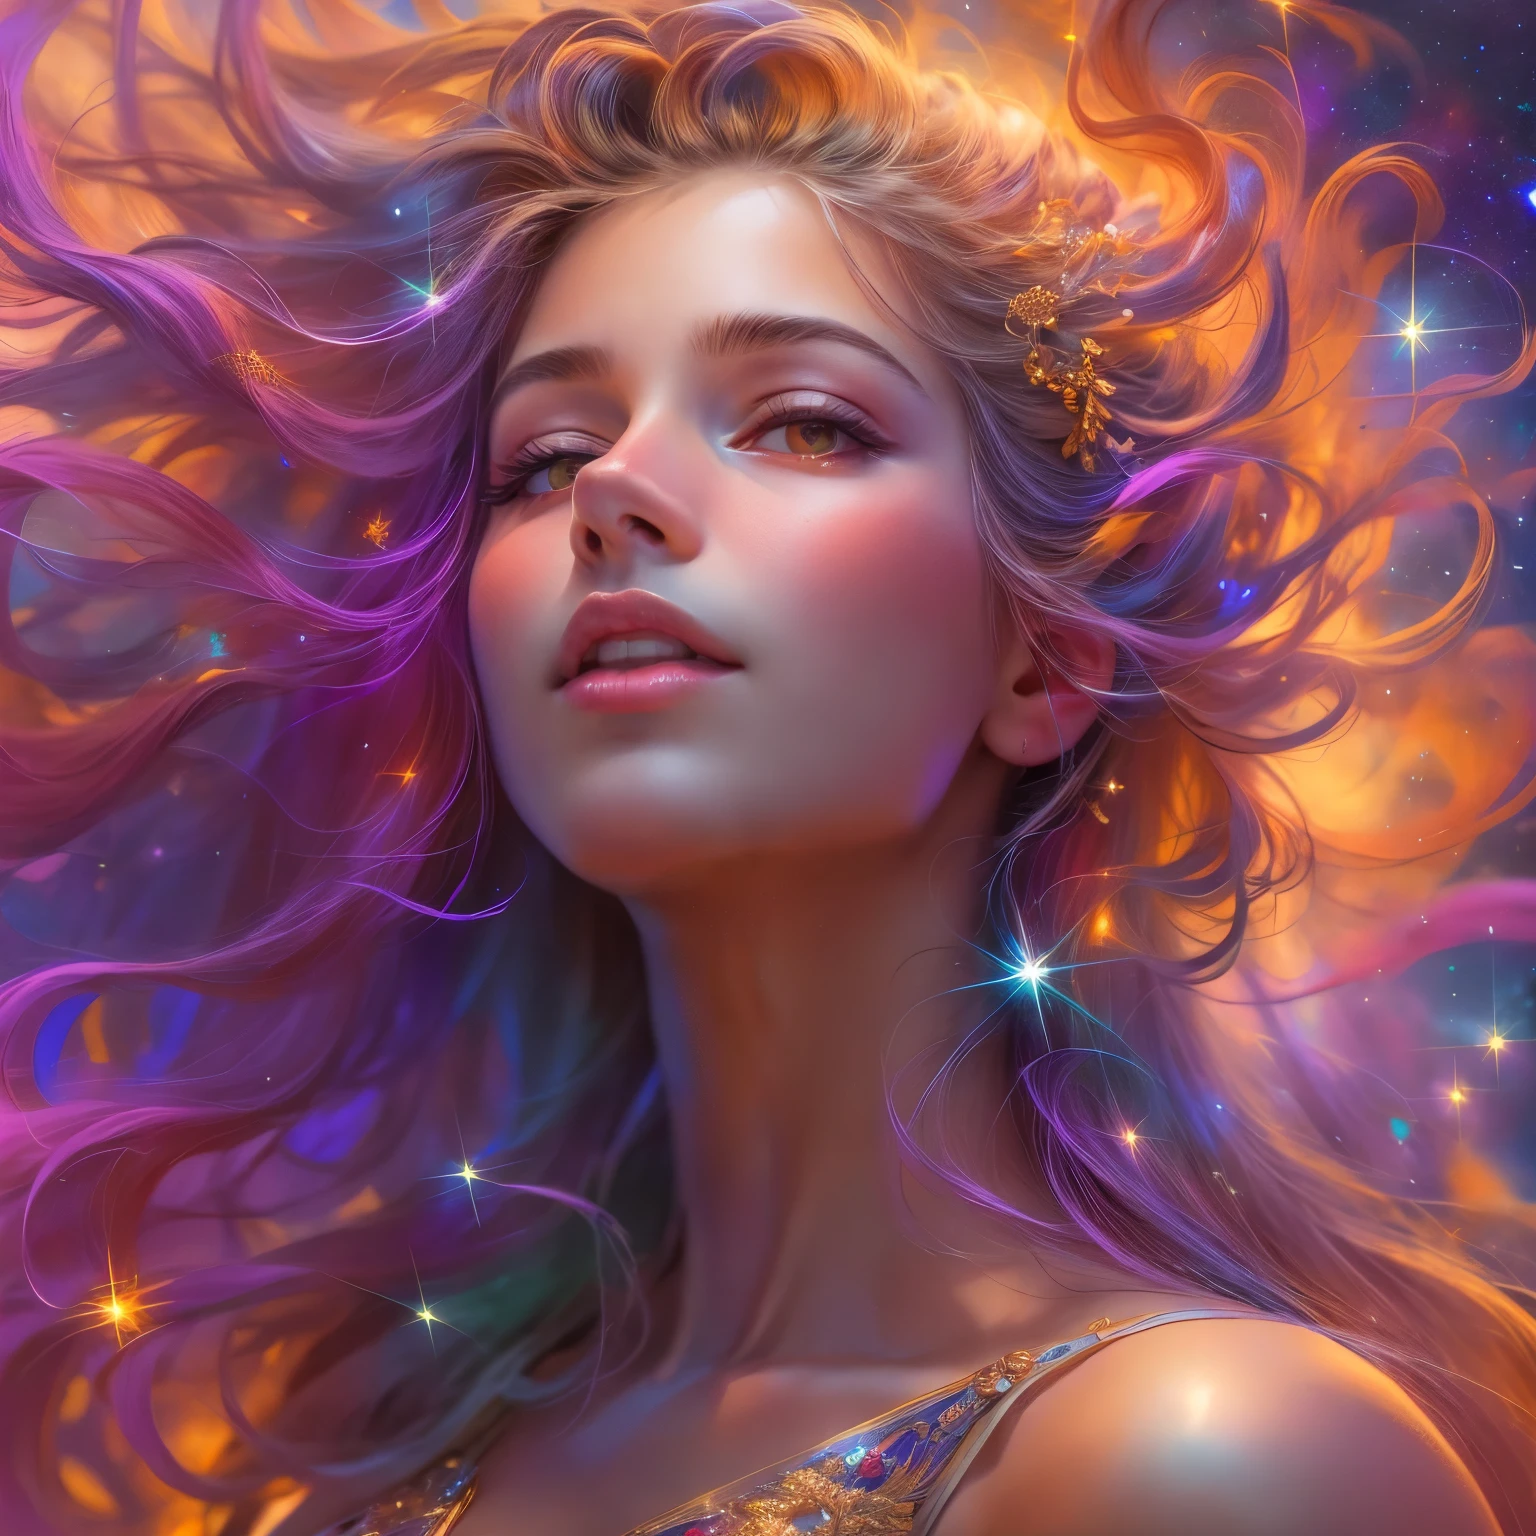 (Highest Quality,High Resolution,Masterpiece:1.2),Ultra-Detailed,(Realistic,Photorealistic,Photorealistic:1.37)(goddess of cosmic love:1.1,beautiful:1.1,astral body:1.1),divine goddess,celestial beauty,supernatural presence,spectacular cosmic entity,majestic celestial being,dazzling aura,ethereal radiance,transcendent elegance,(luminous energy:1.1),(immortal deity:1.2),heavenly grace,mystical attire,serene expression,golden hair flowing,(shimmering eyes:1.1),(ethereal beauty:1.1),magnificent celestial realm,divine love and compassion,colorful nebulae dancing in the background,glowing stardust particles floating around her,galaxies swirling around her as her divine power expands,infinite space stretching far beyond the horizon,hint of magic(twinkle of magic:1.1),cosmic rays bathing the scene in a celestial glow,(vibrant hues:1.1),(cosmic colors:1.1),soothing color palette,evoking feelings of peace and tranquility,majestic divine presence that fills the whole universe,magical atmosphere,(delicate details:1.1),fine brushstrokes creating intricate patterns,(ethereal strokes:1.1),(dreamlike strokes:1.1),highly detailed rendering of her celestial features,subtle gradients giving depth to the image,meticulously crafted textures that bring her to life,impeccably realistic portrayal,(impressive definition:1.1),(stunning realism:1.1),immaculate attention to detail as every strand of hair is visible,(impeccable photorealism:1.1),(ultra-detailed illustration:1.1),(masterpiece of art:1.1),perfectly composed composition with balanced lighting and shadows,soft yet vibrant illumination highlighting her divine beauty,magical glow emanating from her celestial body,subtle highlights and shadows adding depth and dimension,(sublime luminosity:1.1),(ethereal lighting:1.1),(radiant glow:1.1),(harmonious lighting:1.1)